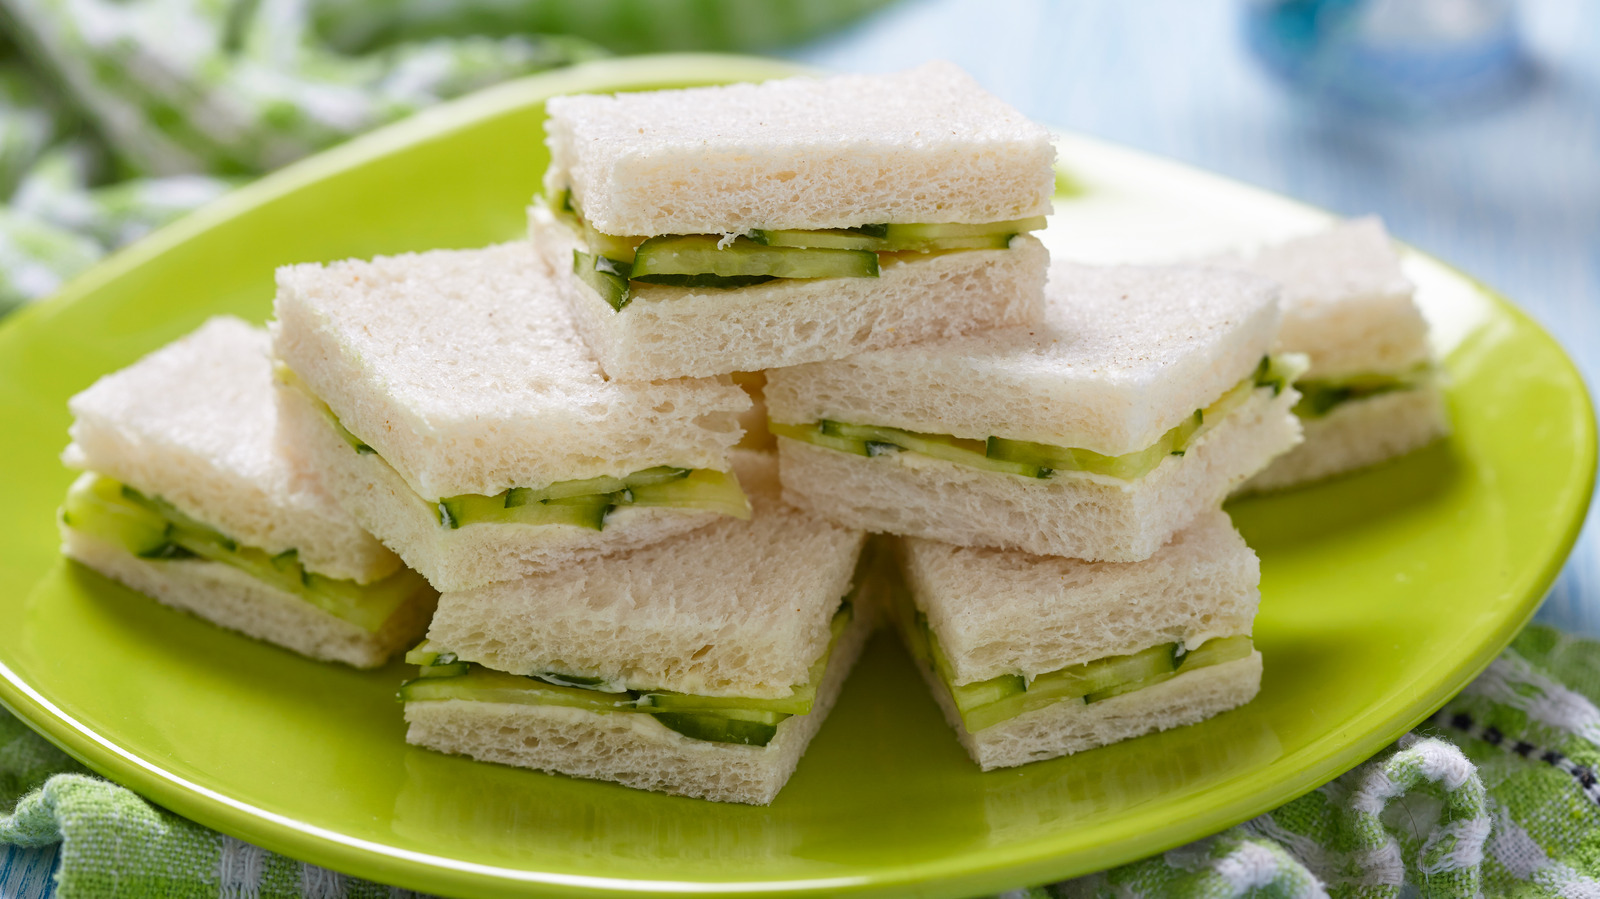 https://www.tastingtable.com/img/gallery/the-bread-to-give-cucumber-tea-sandwiches-a-flavor-boost/l-intro-1677521228.jpg